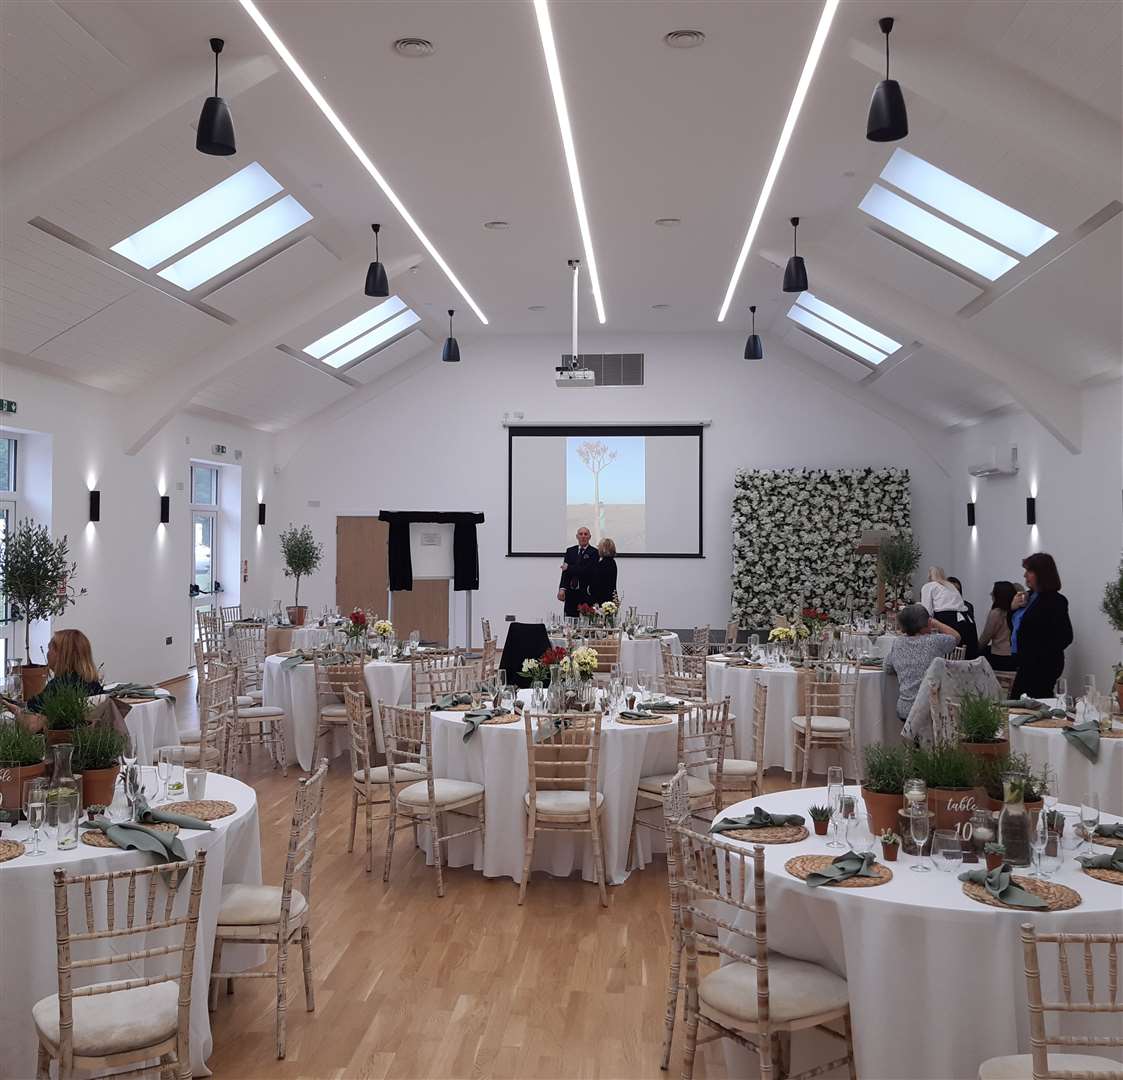 In addition to scout and other youth-led activities the venue will also be available for weddings. Photo: Sean Delaney